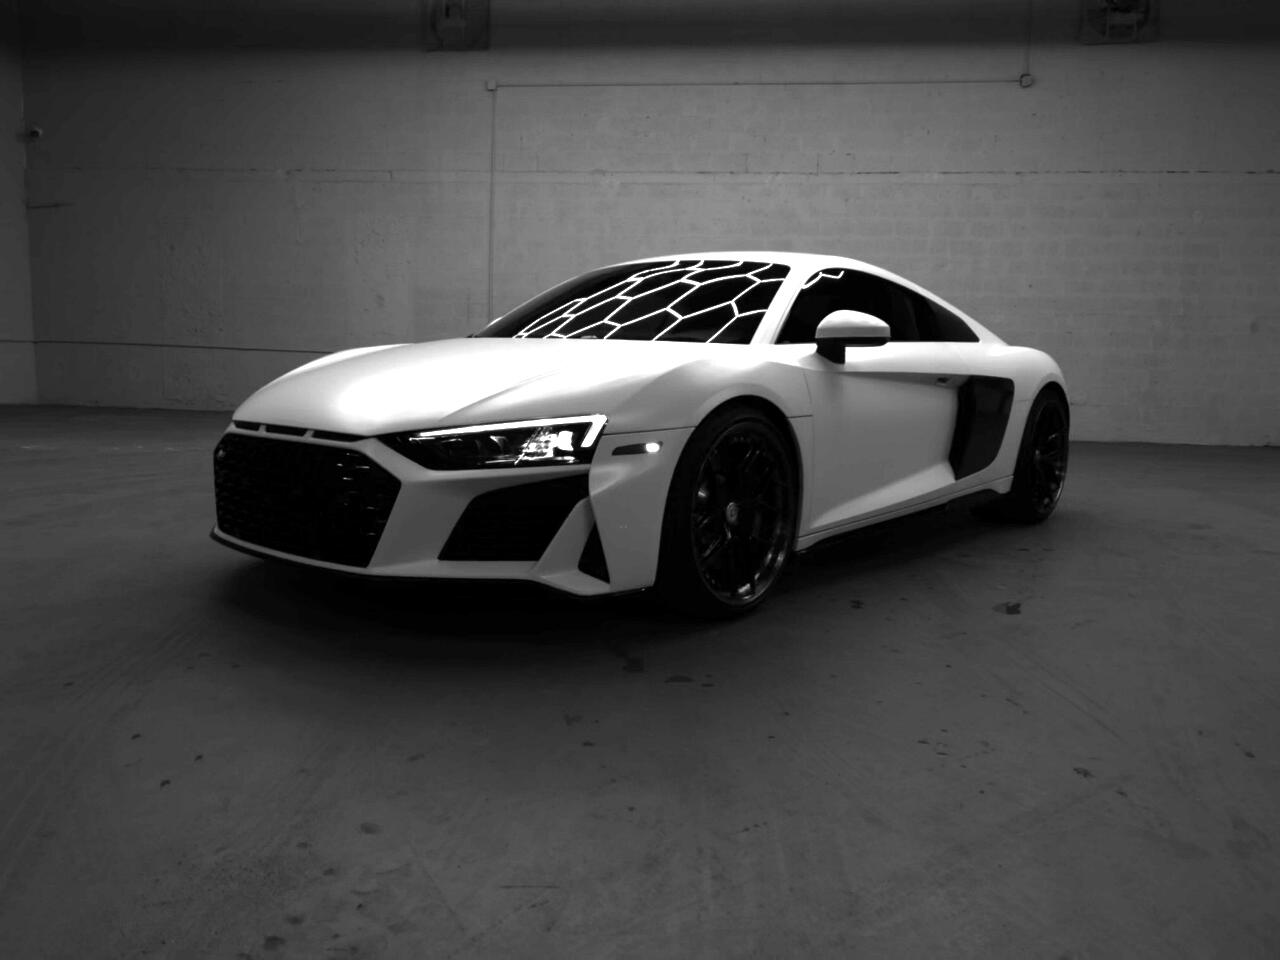 Used 2021 Audi R8 Coupe V10 Rwd For Sale In Miami Fl 33166 Gold Coast Cars  Corp